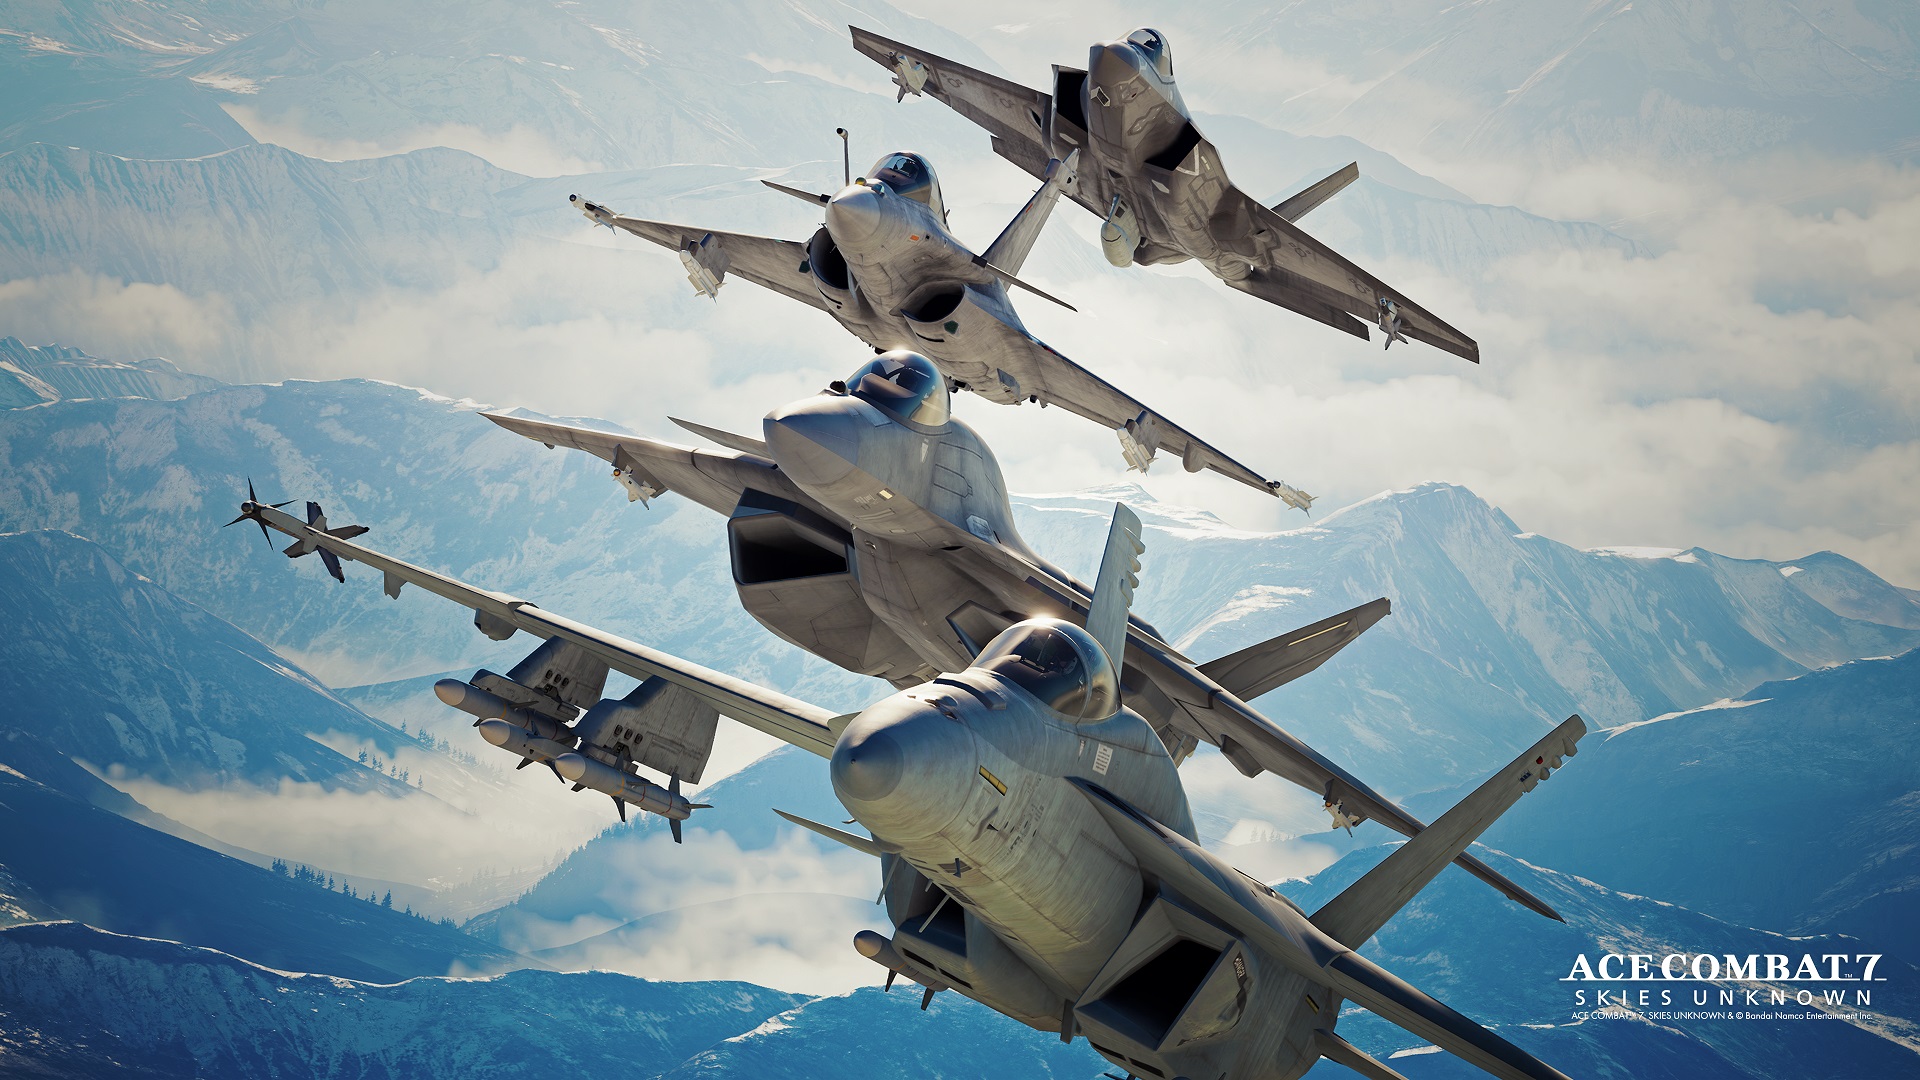 Ace Combat 7: Skies Unknown sells over 4 million copies